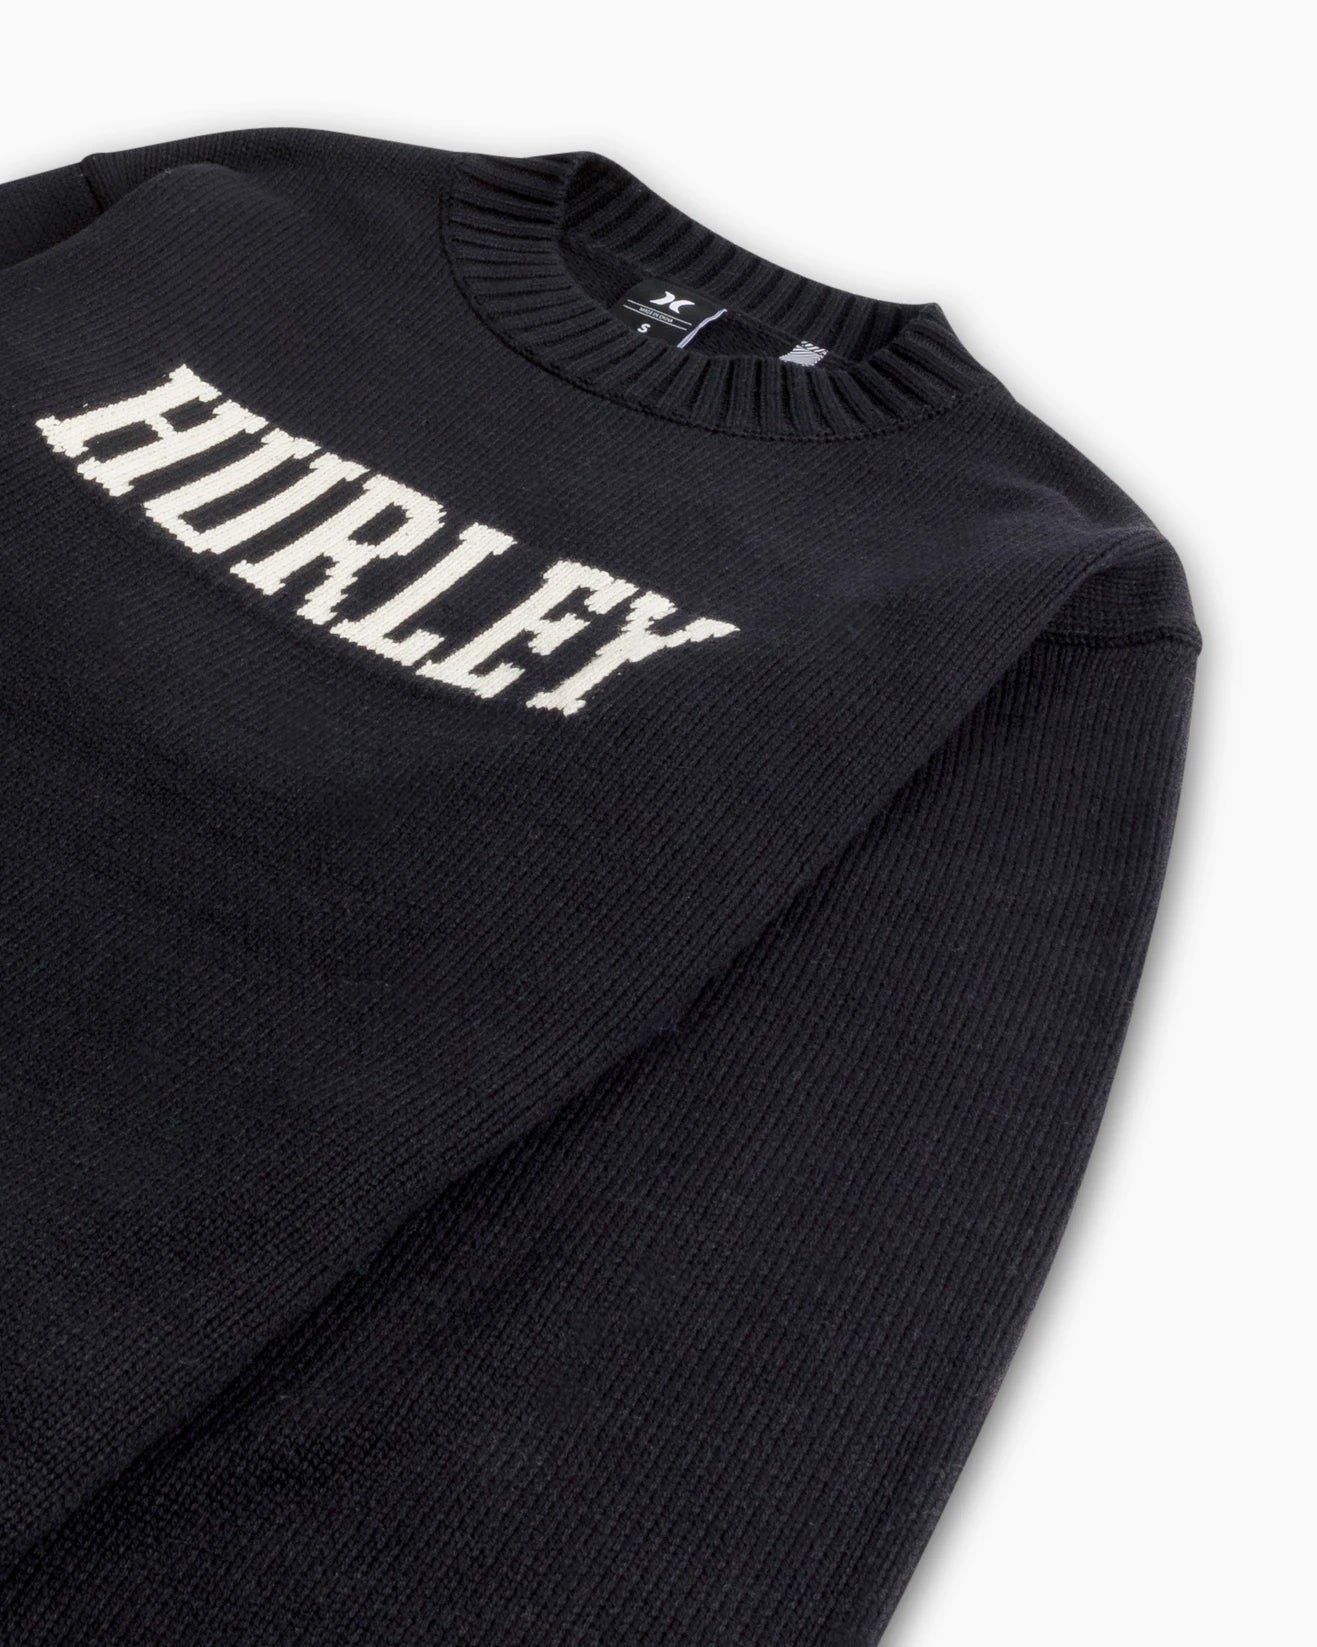 HURLEY HYGGE CREW KNIT